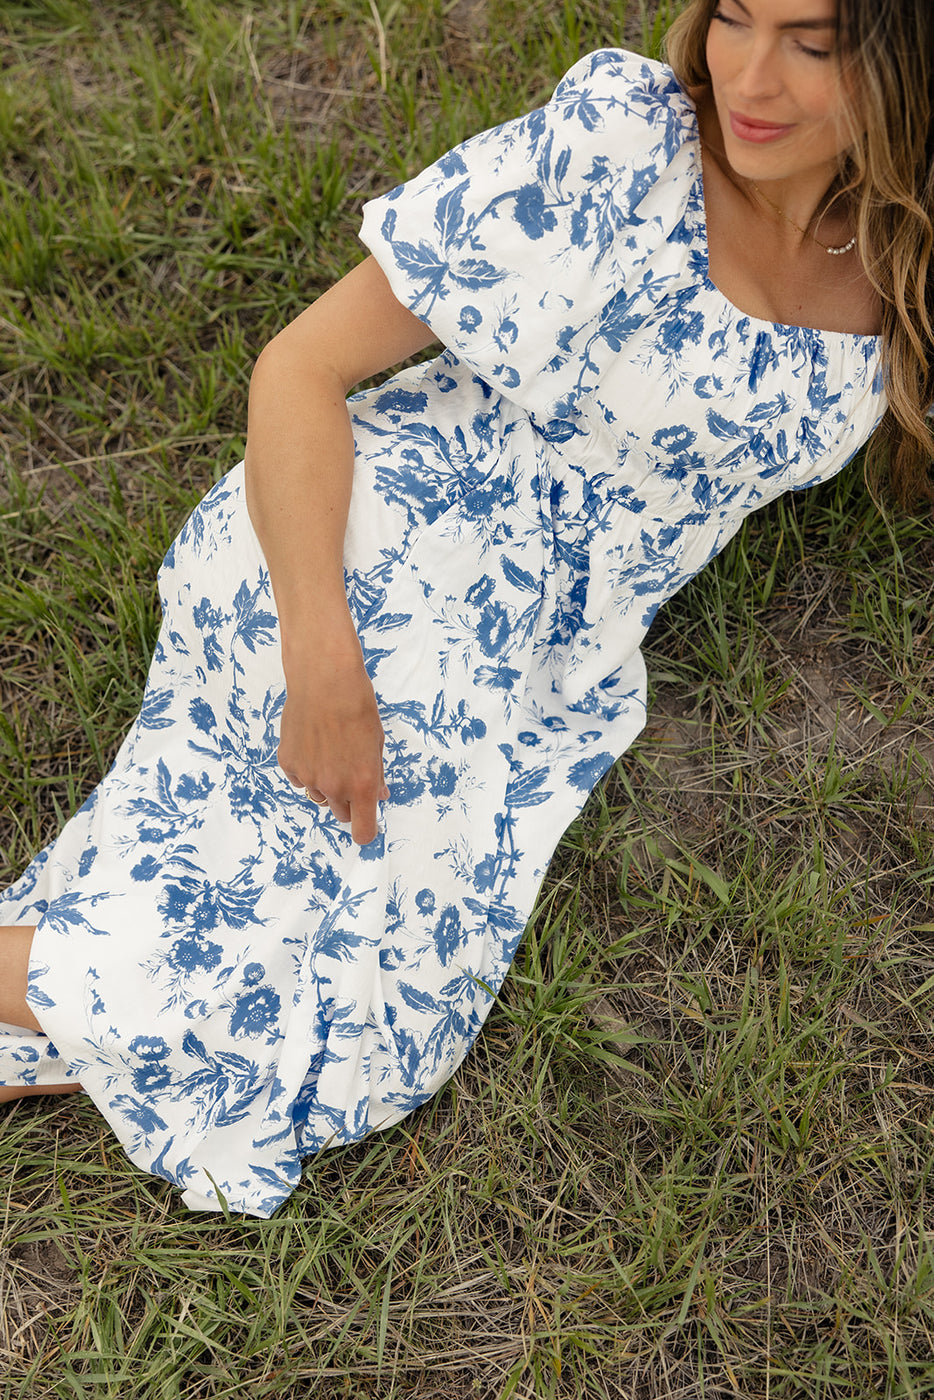 a woman in a white and blue dress lying on grass